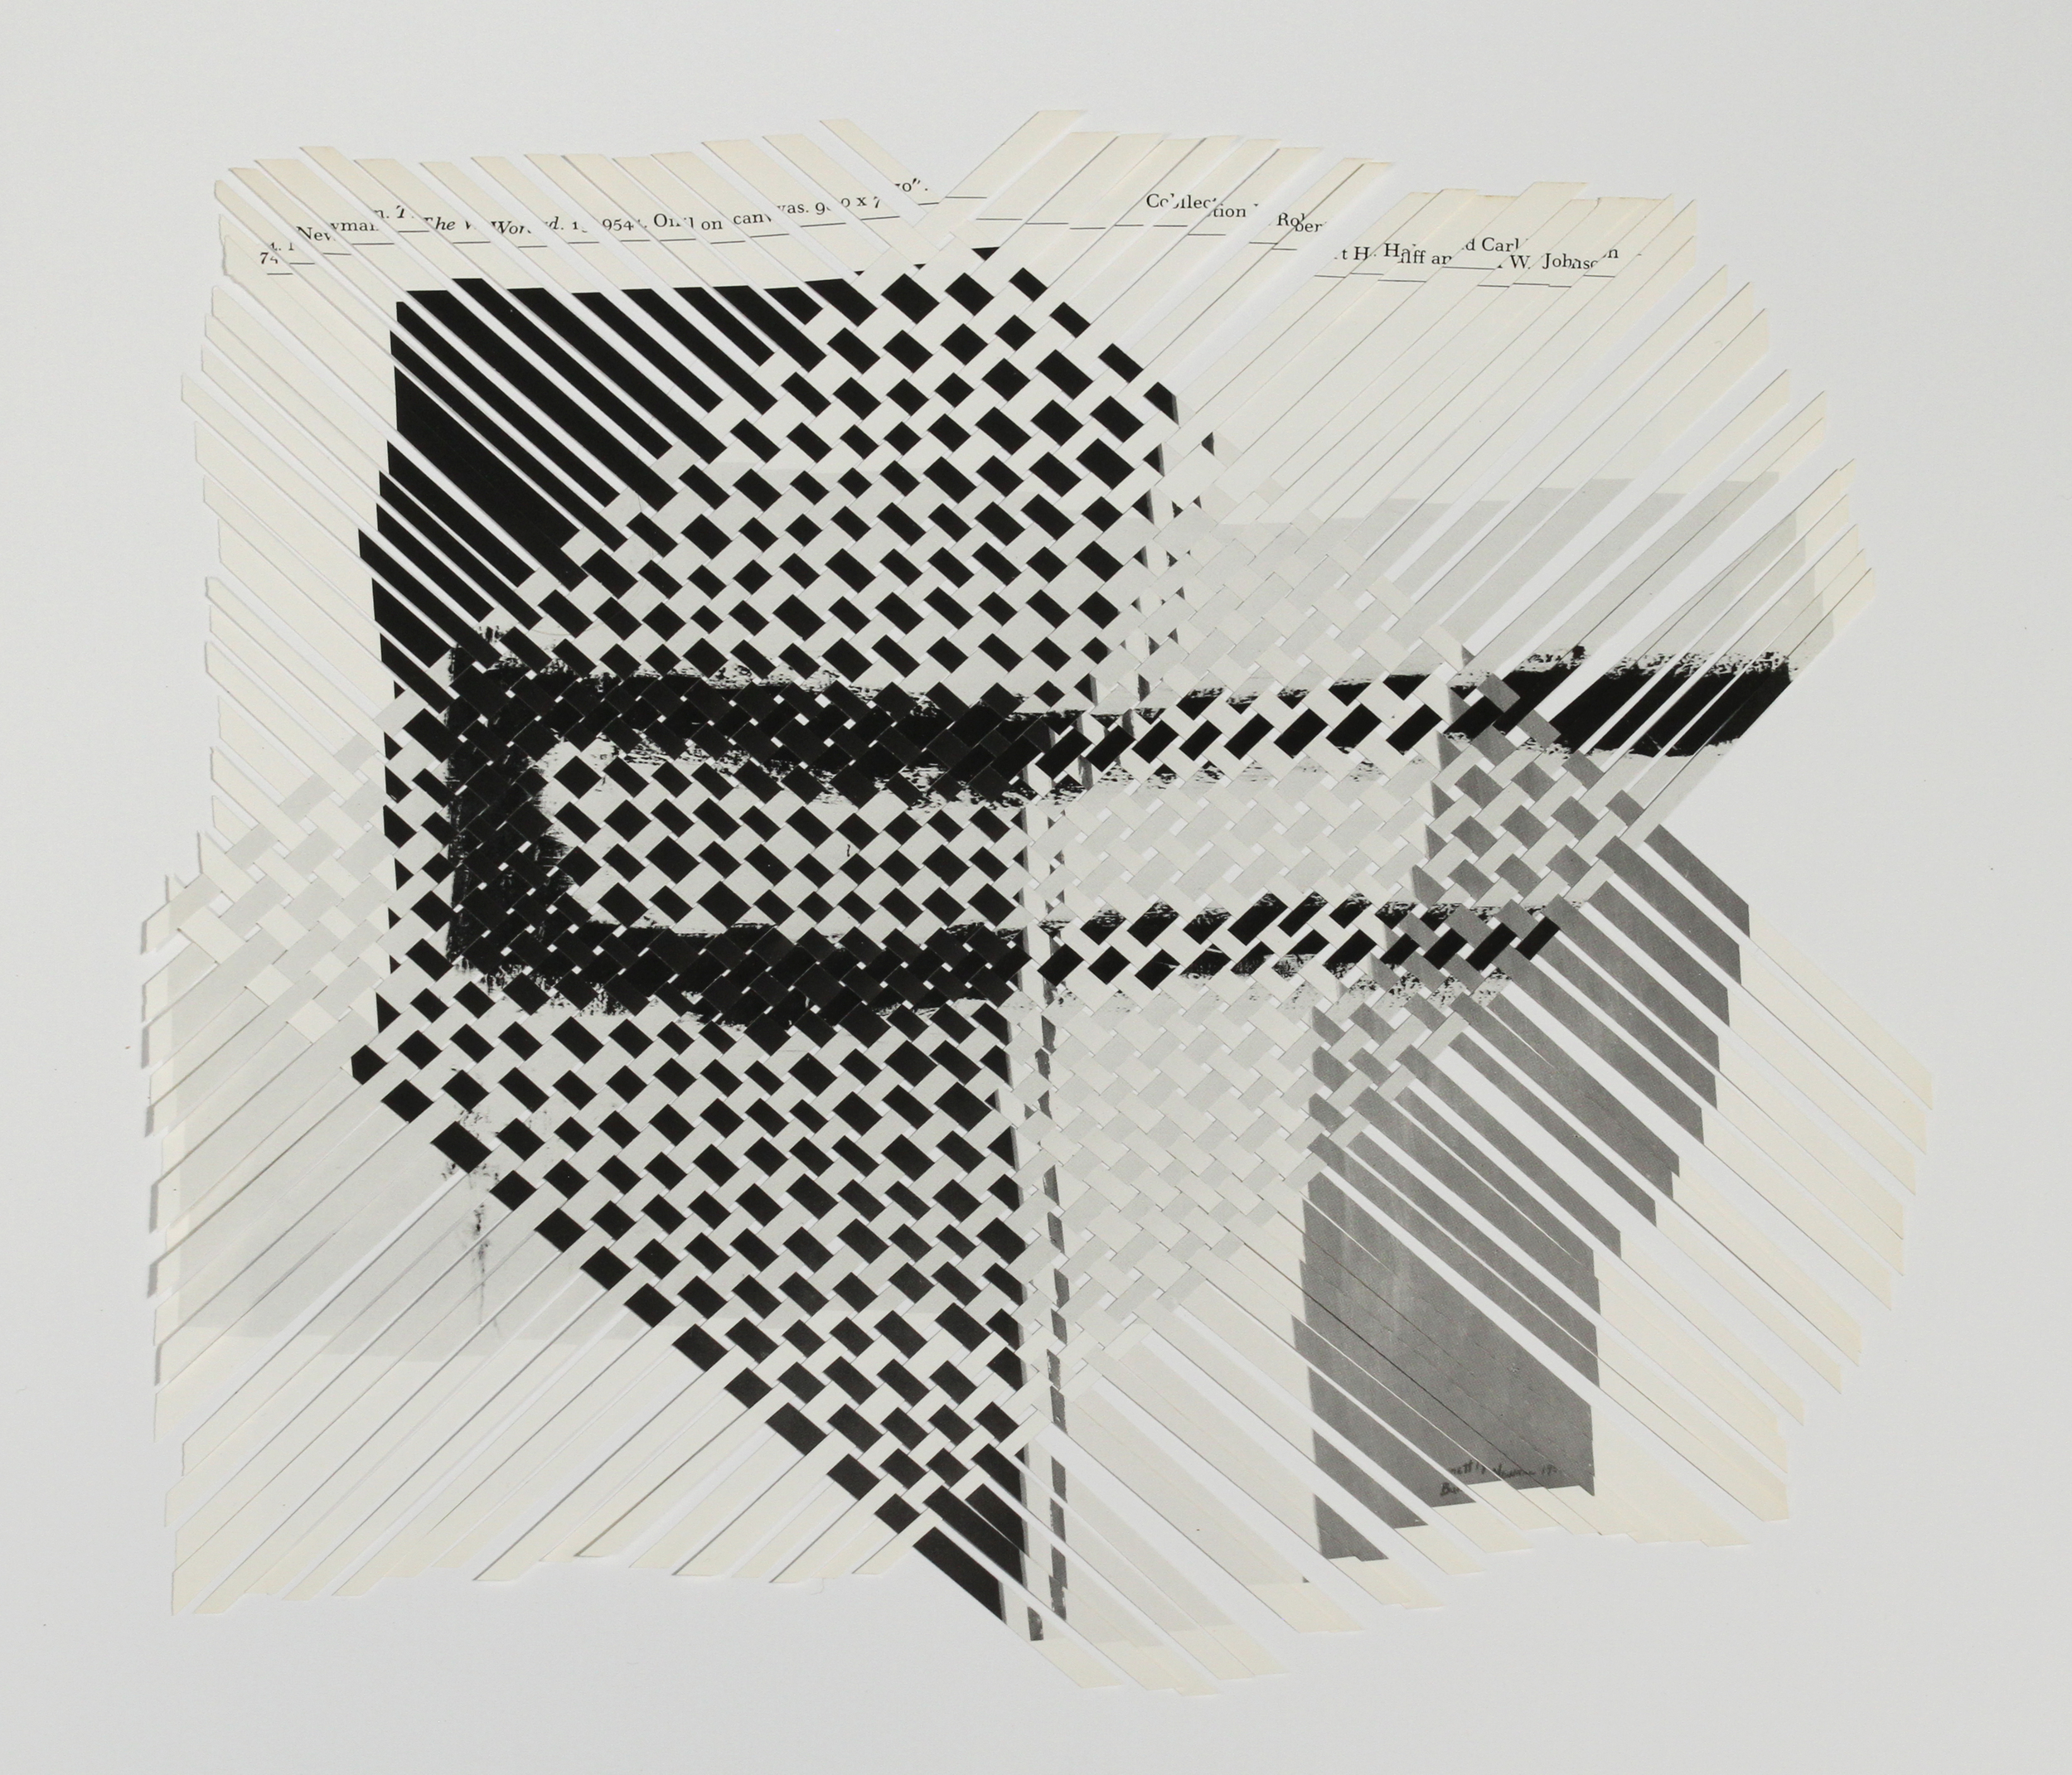 newmanklein (black and white), 2013, paper weaving, 10 x 10